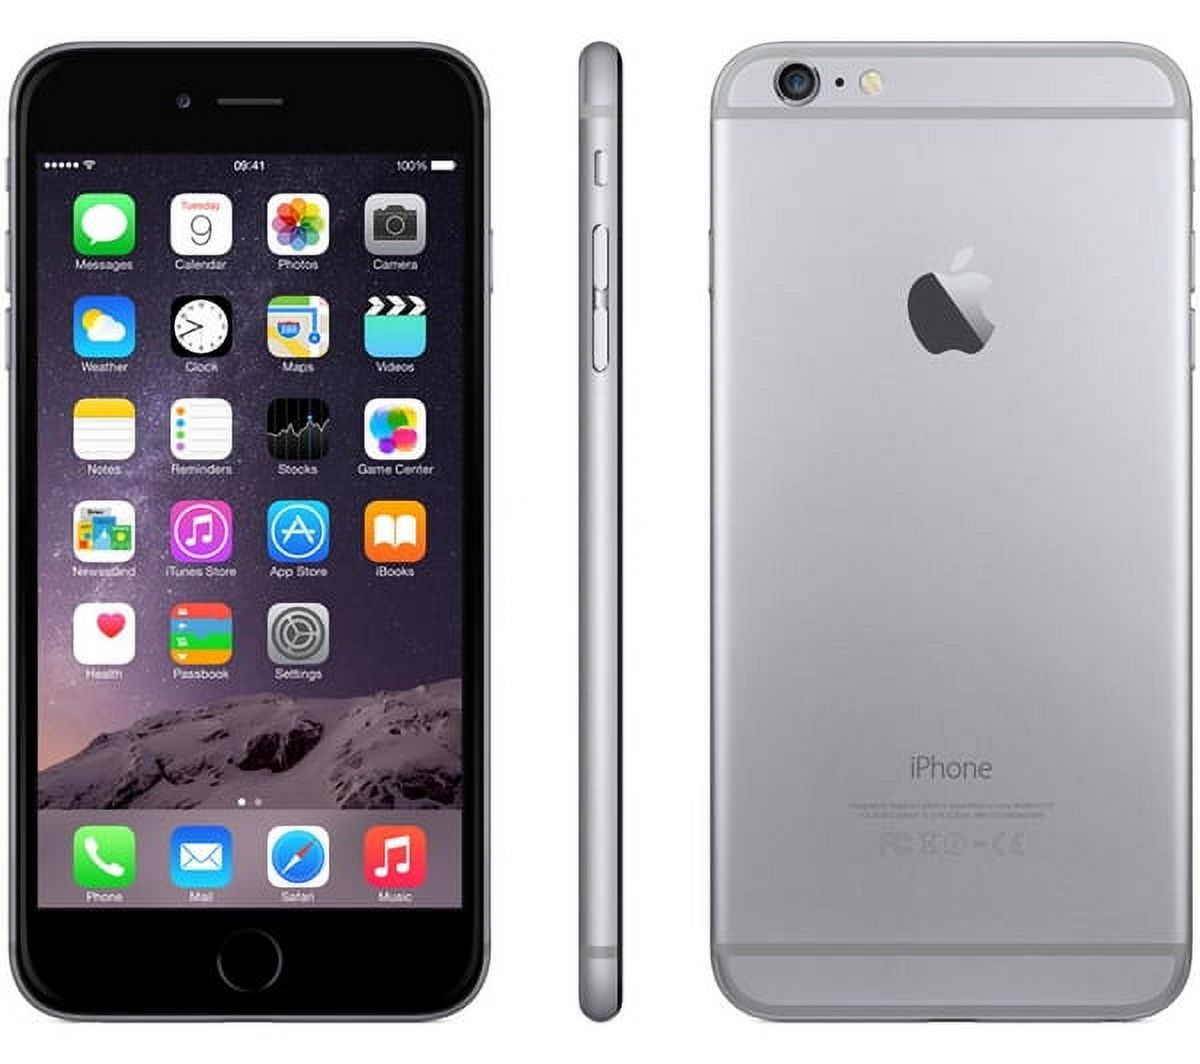 Restored Apple iPhone 6 Plus 16GB Space Gray LTE Cellular AT&T MGAL2LL/A (Refurbished) - image 1 of 3